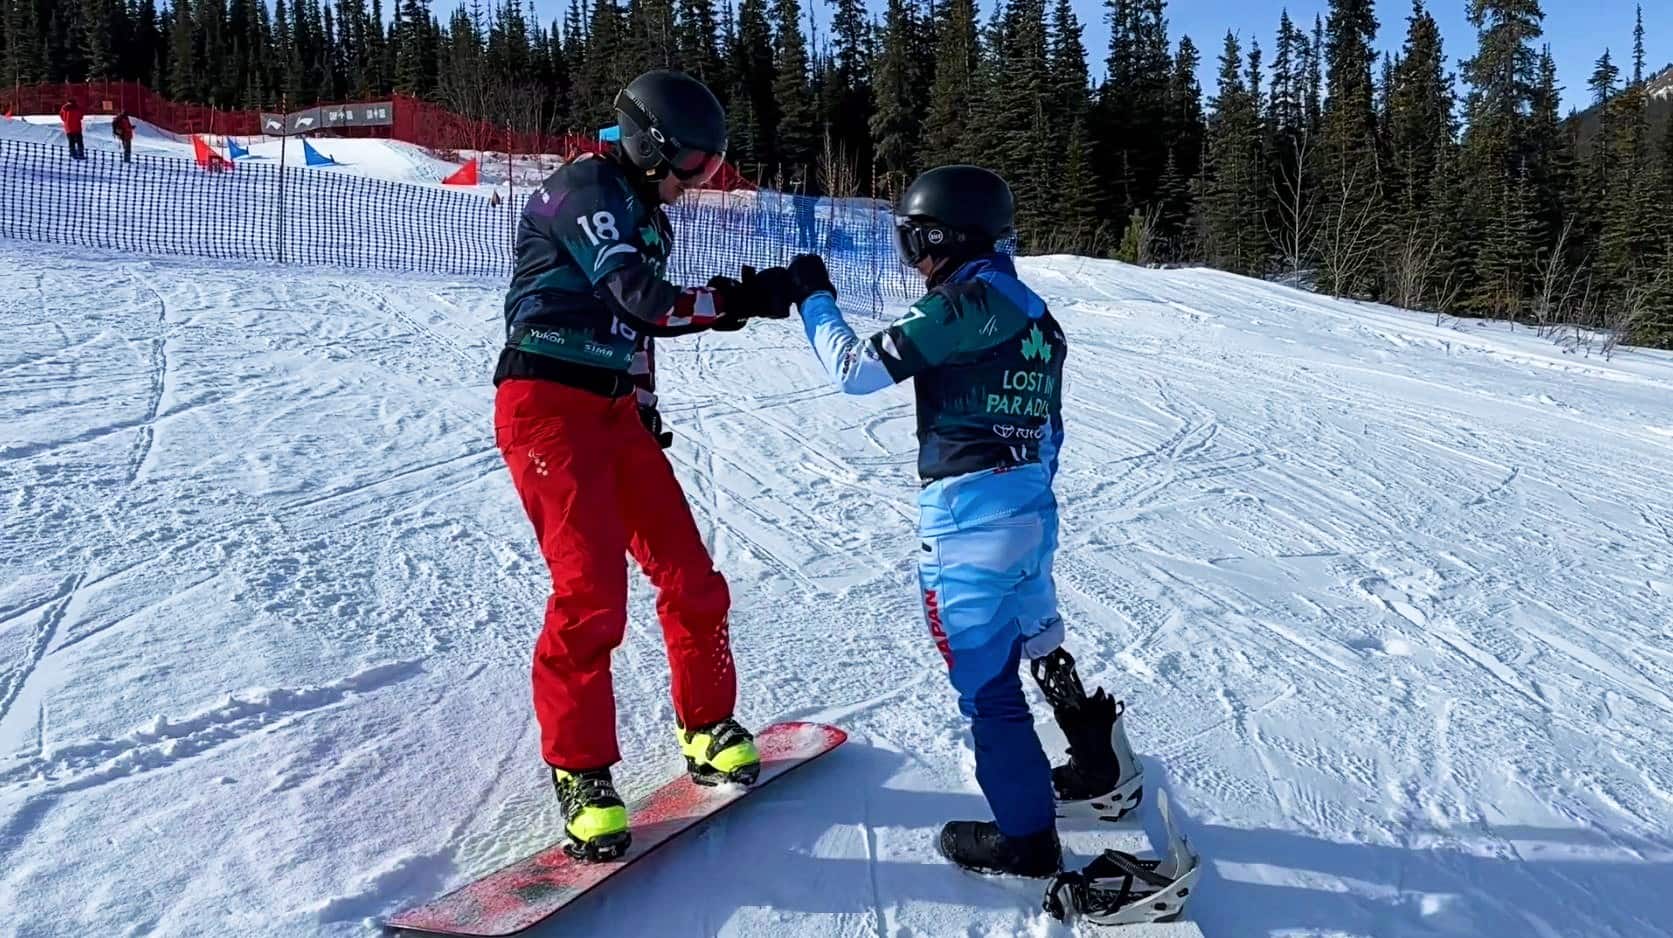 Para-snowboarding world circuit finishes in Whitehorse [Video]